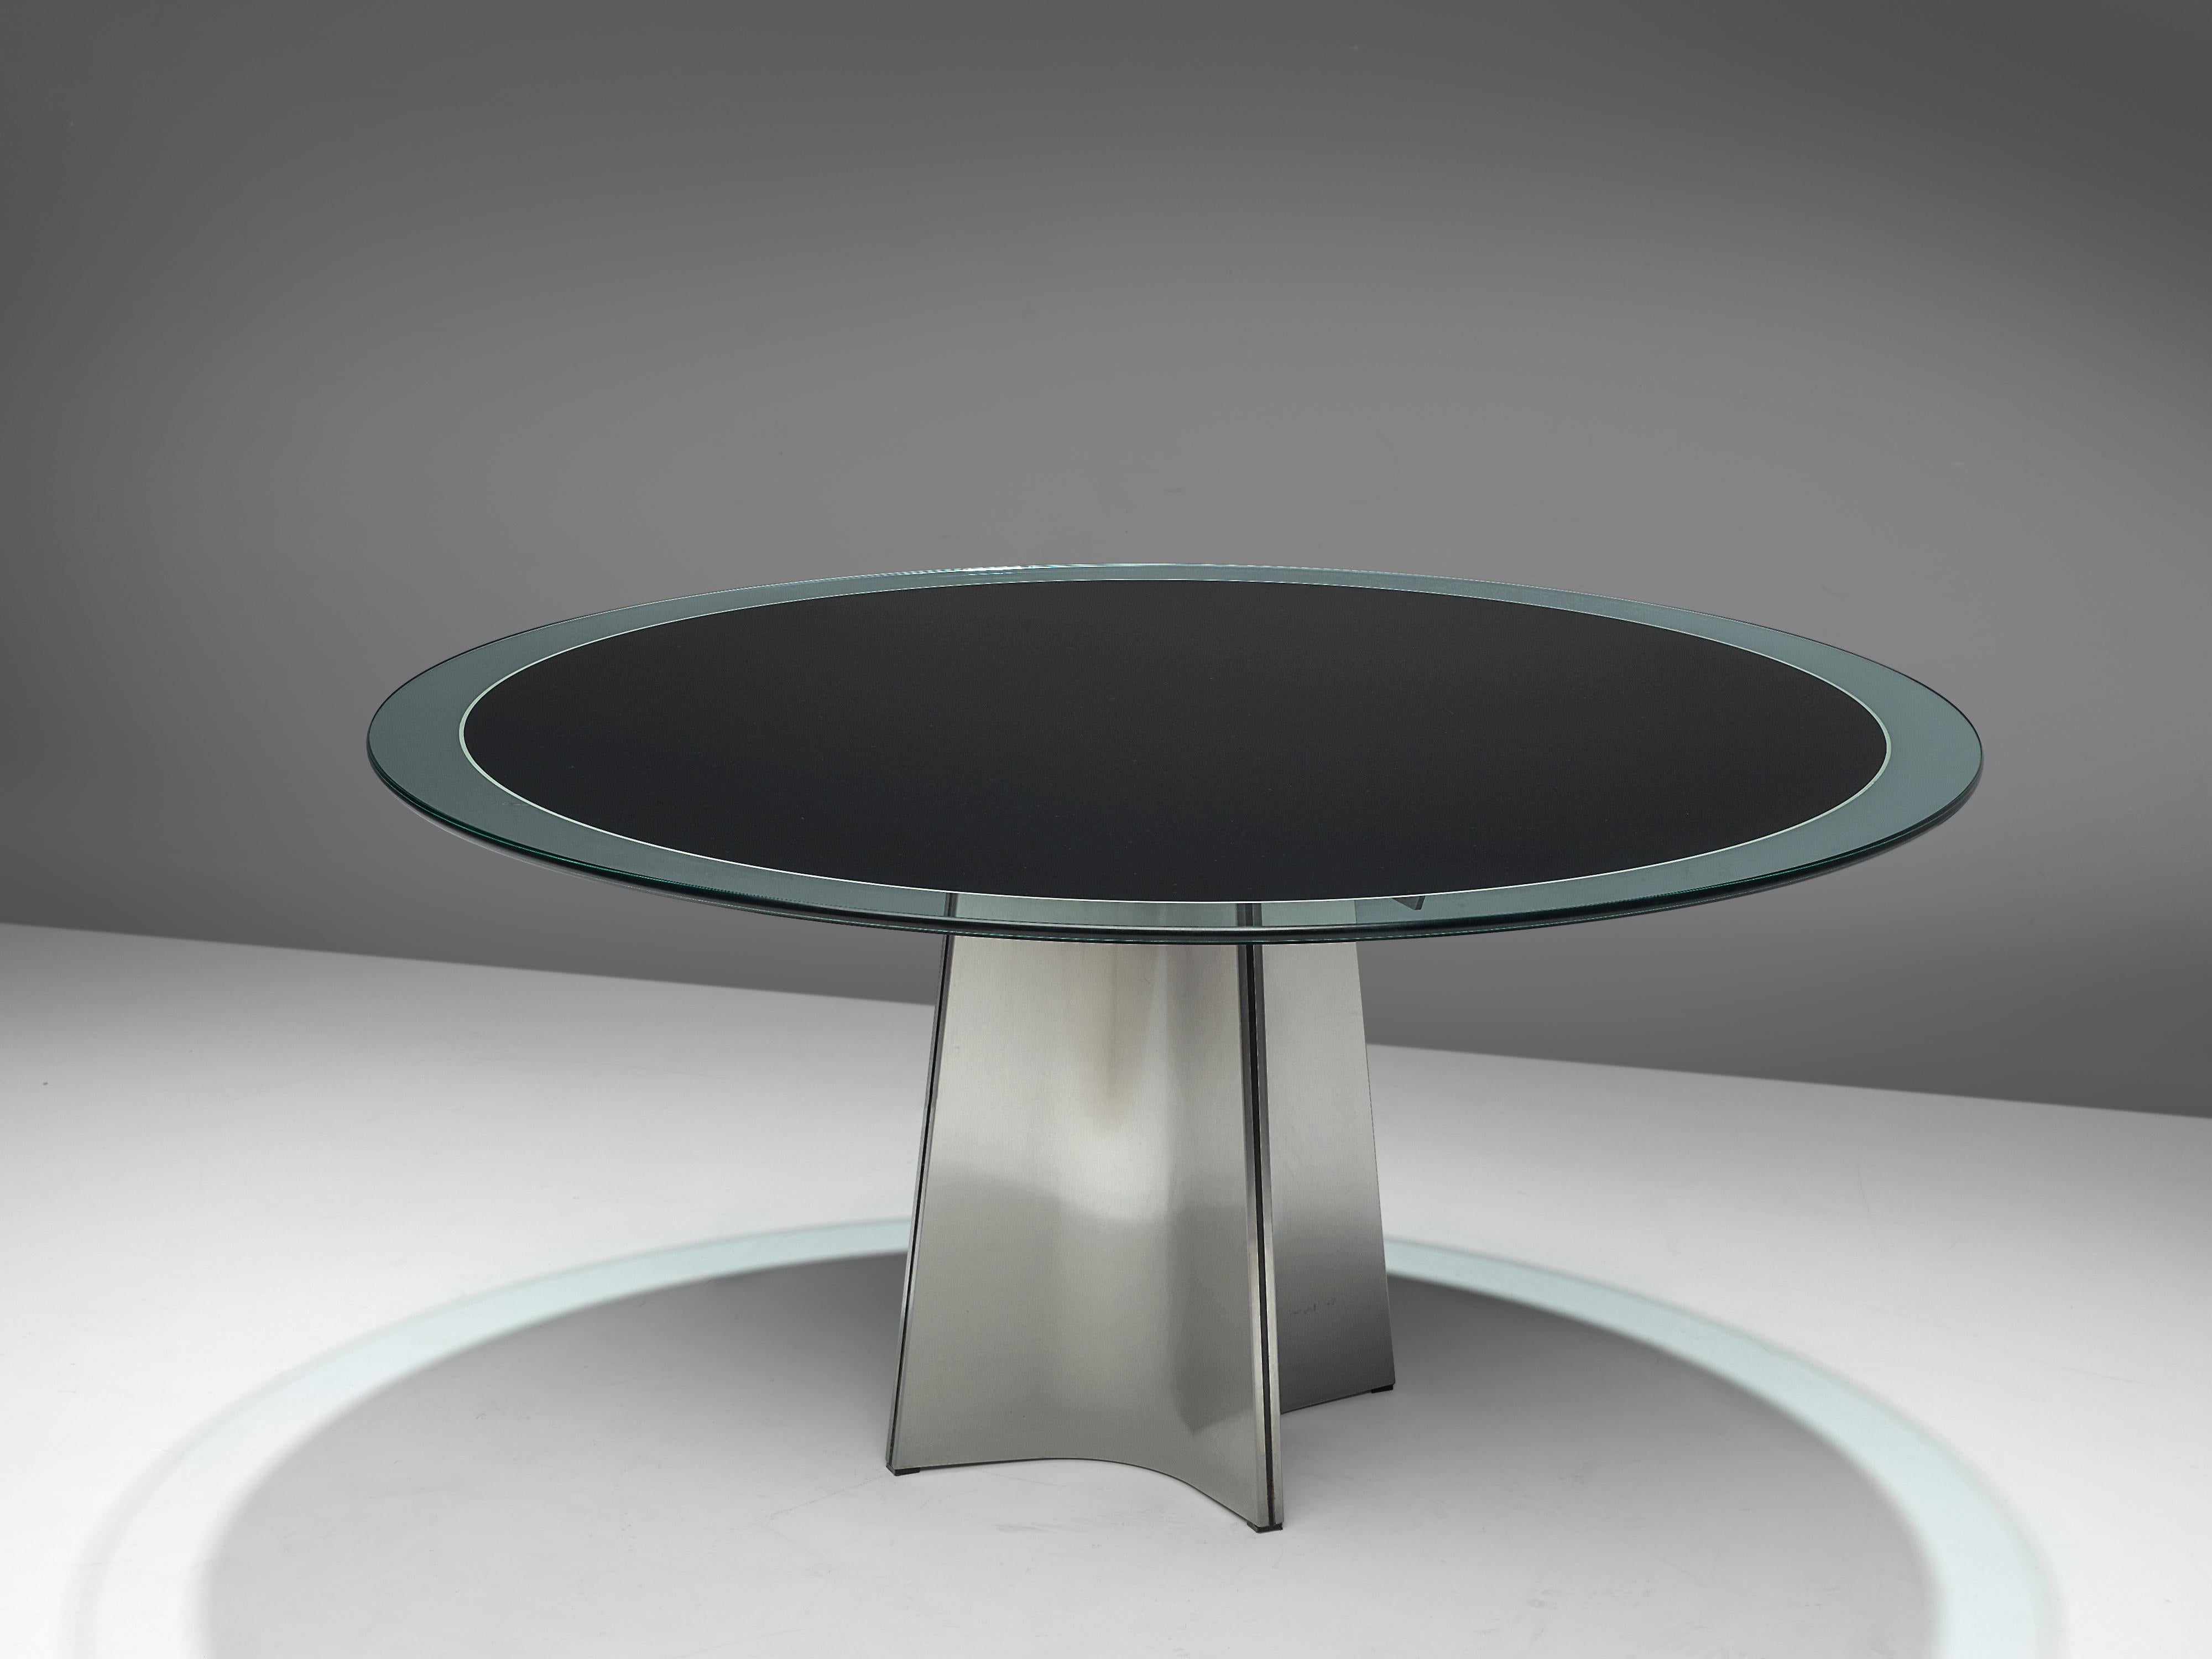 Luigi Saccardo for Armet, round dining table, glass and metal, Italy, 1970s.

Round pedestal dining table in brushed aluminum. A circular clear glass top, with a dark center. The base is formed of four concave curved plates of metal, which combine